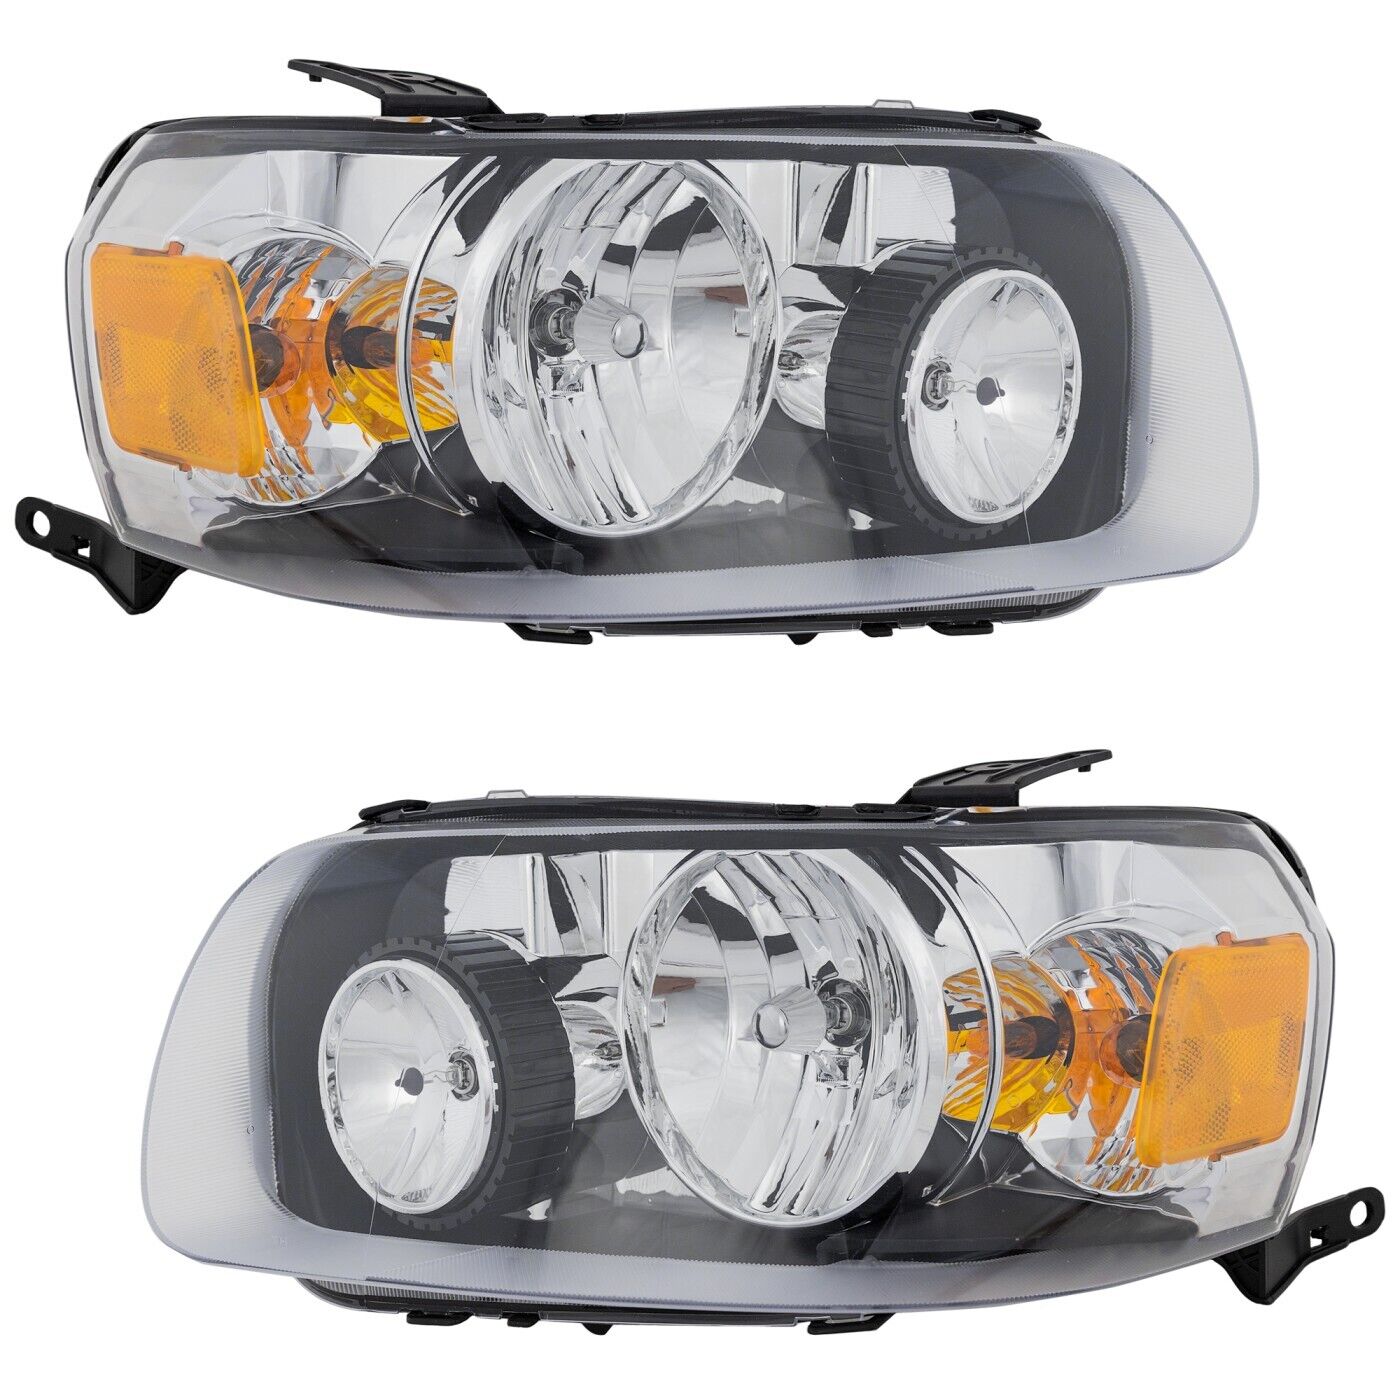 Headlight Set For 2005-2007 Ford Escape with Bulbs Driver and Passenger Side